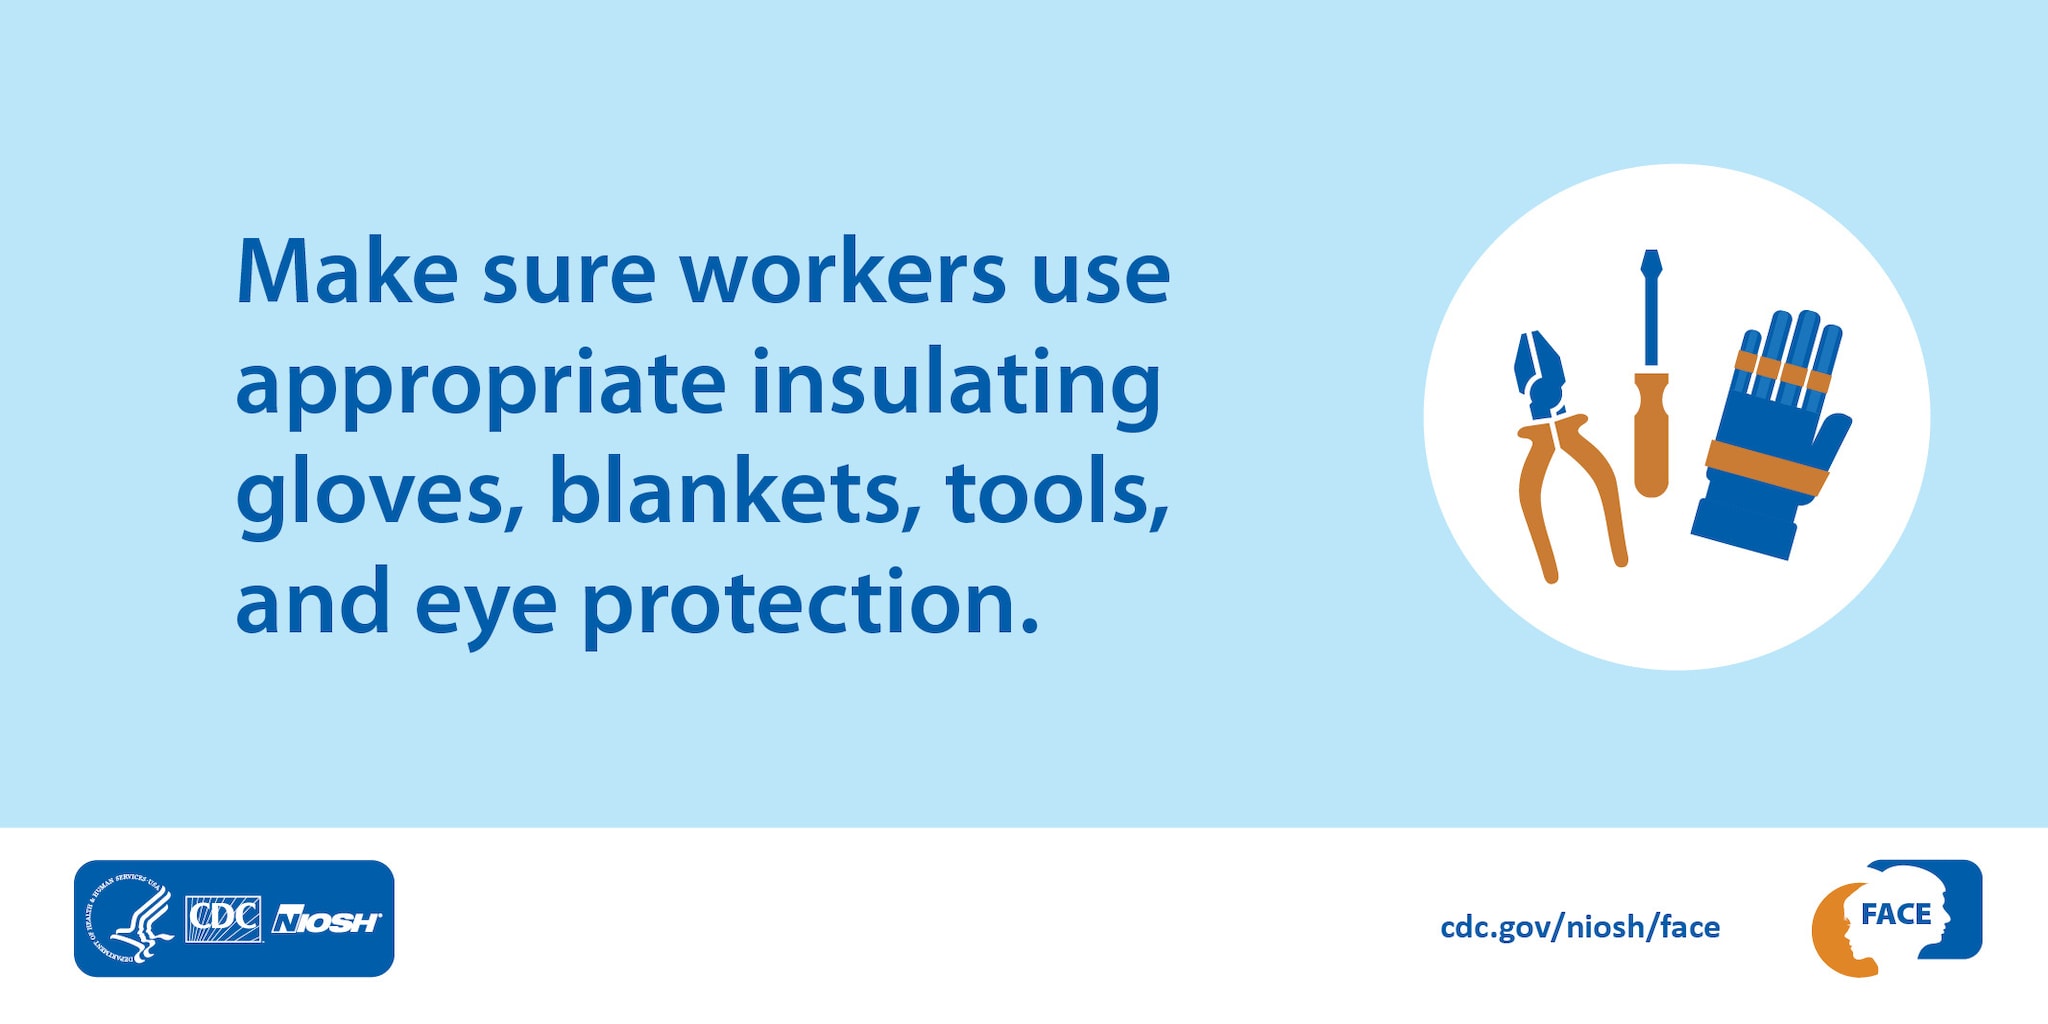 Make sure workers use appropriate insulating gloves, blankets, tools, and eye protection.